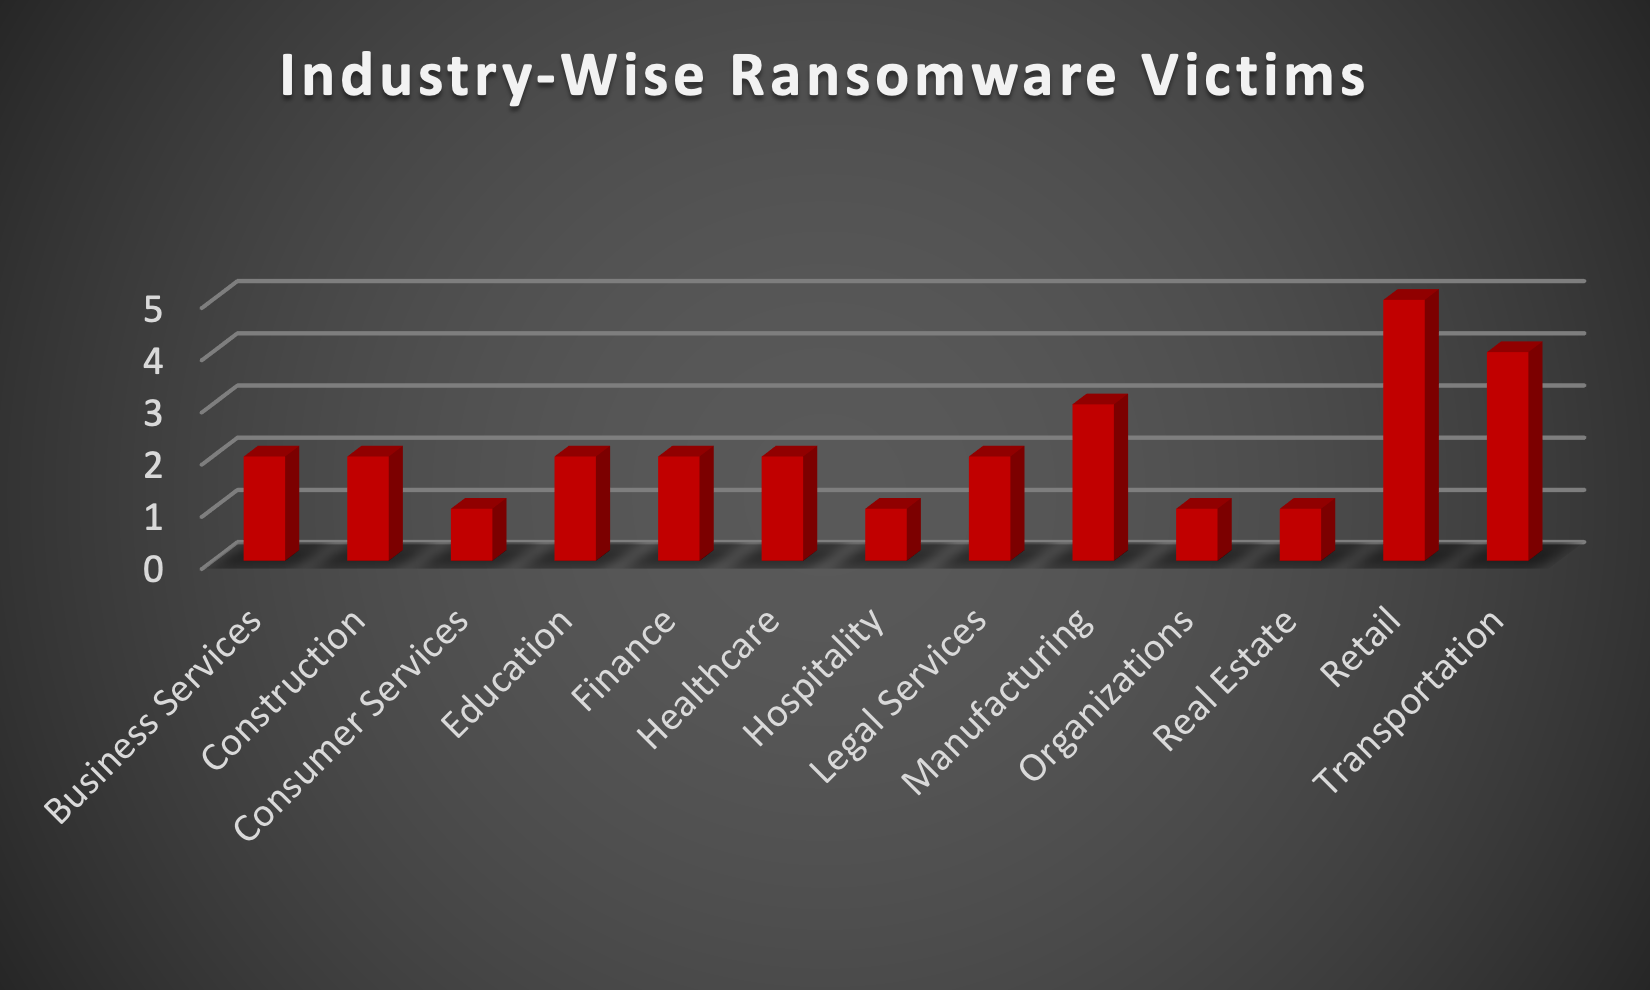 Industry-wise Ransomware Victims